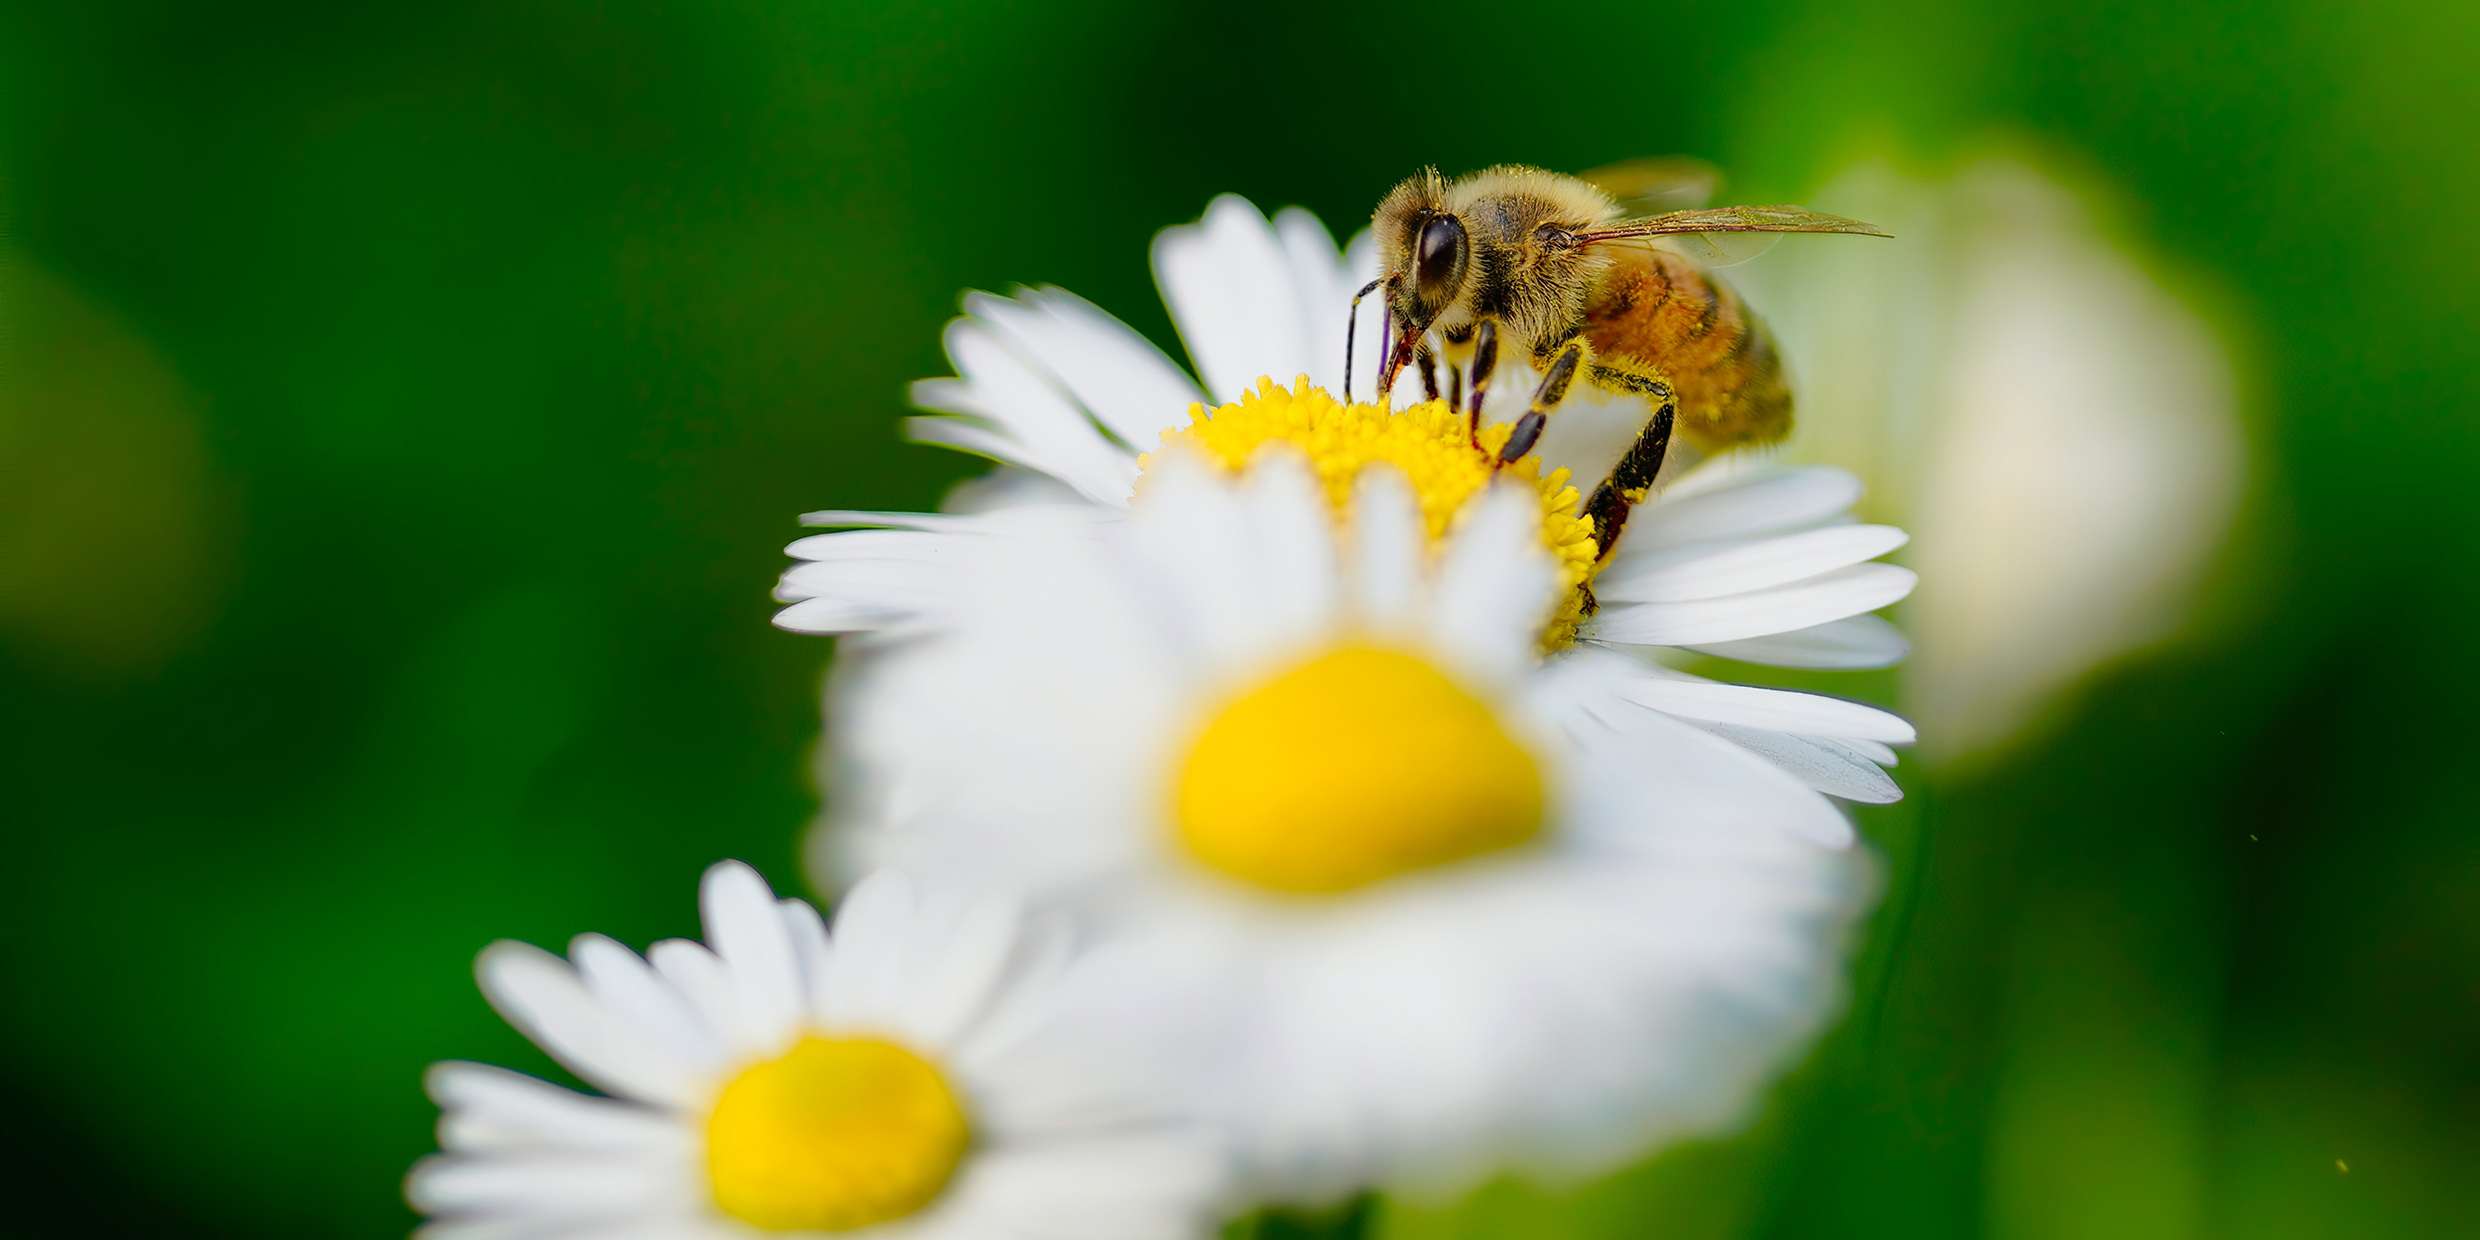 Image of a bee pollinating a flower